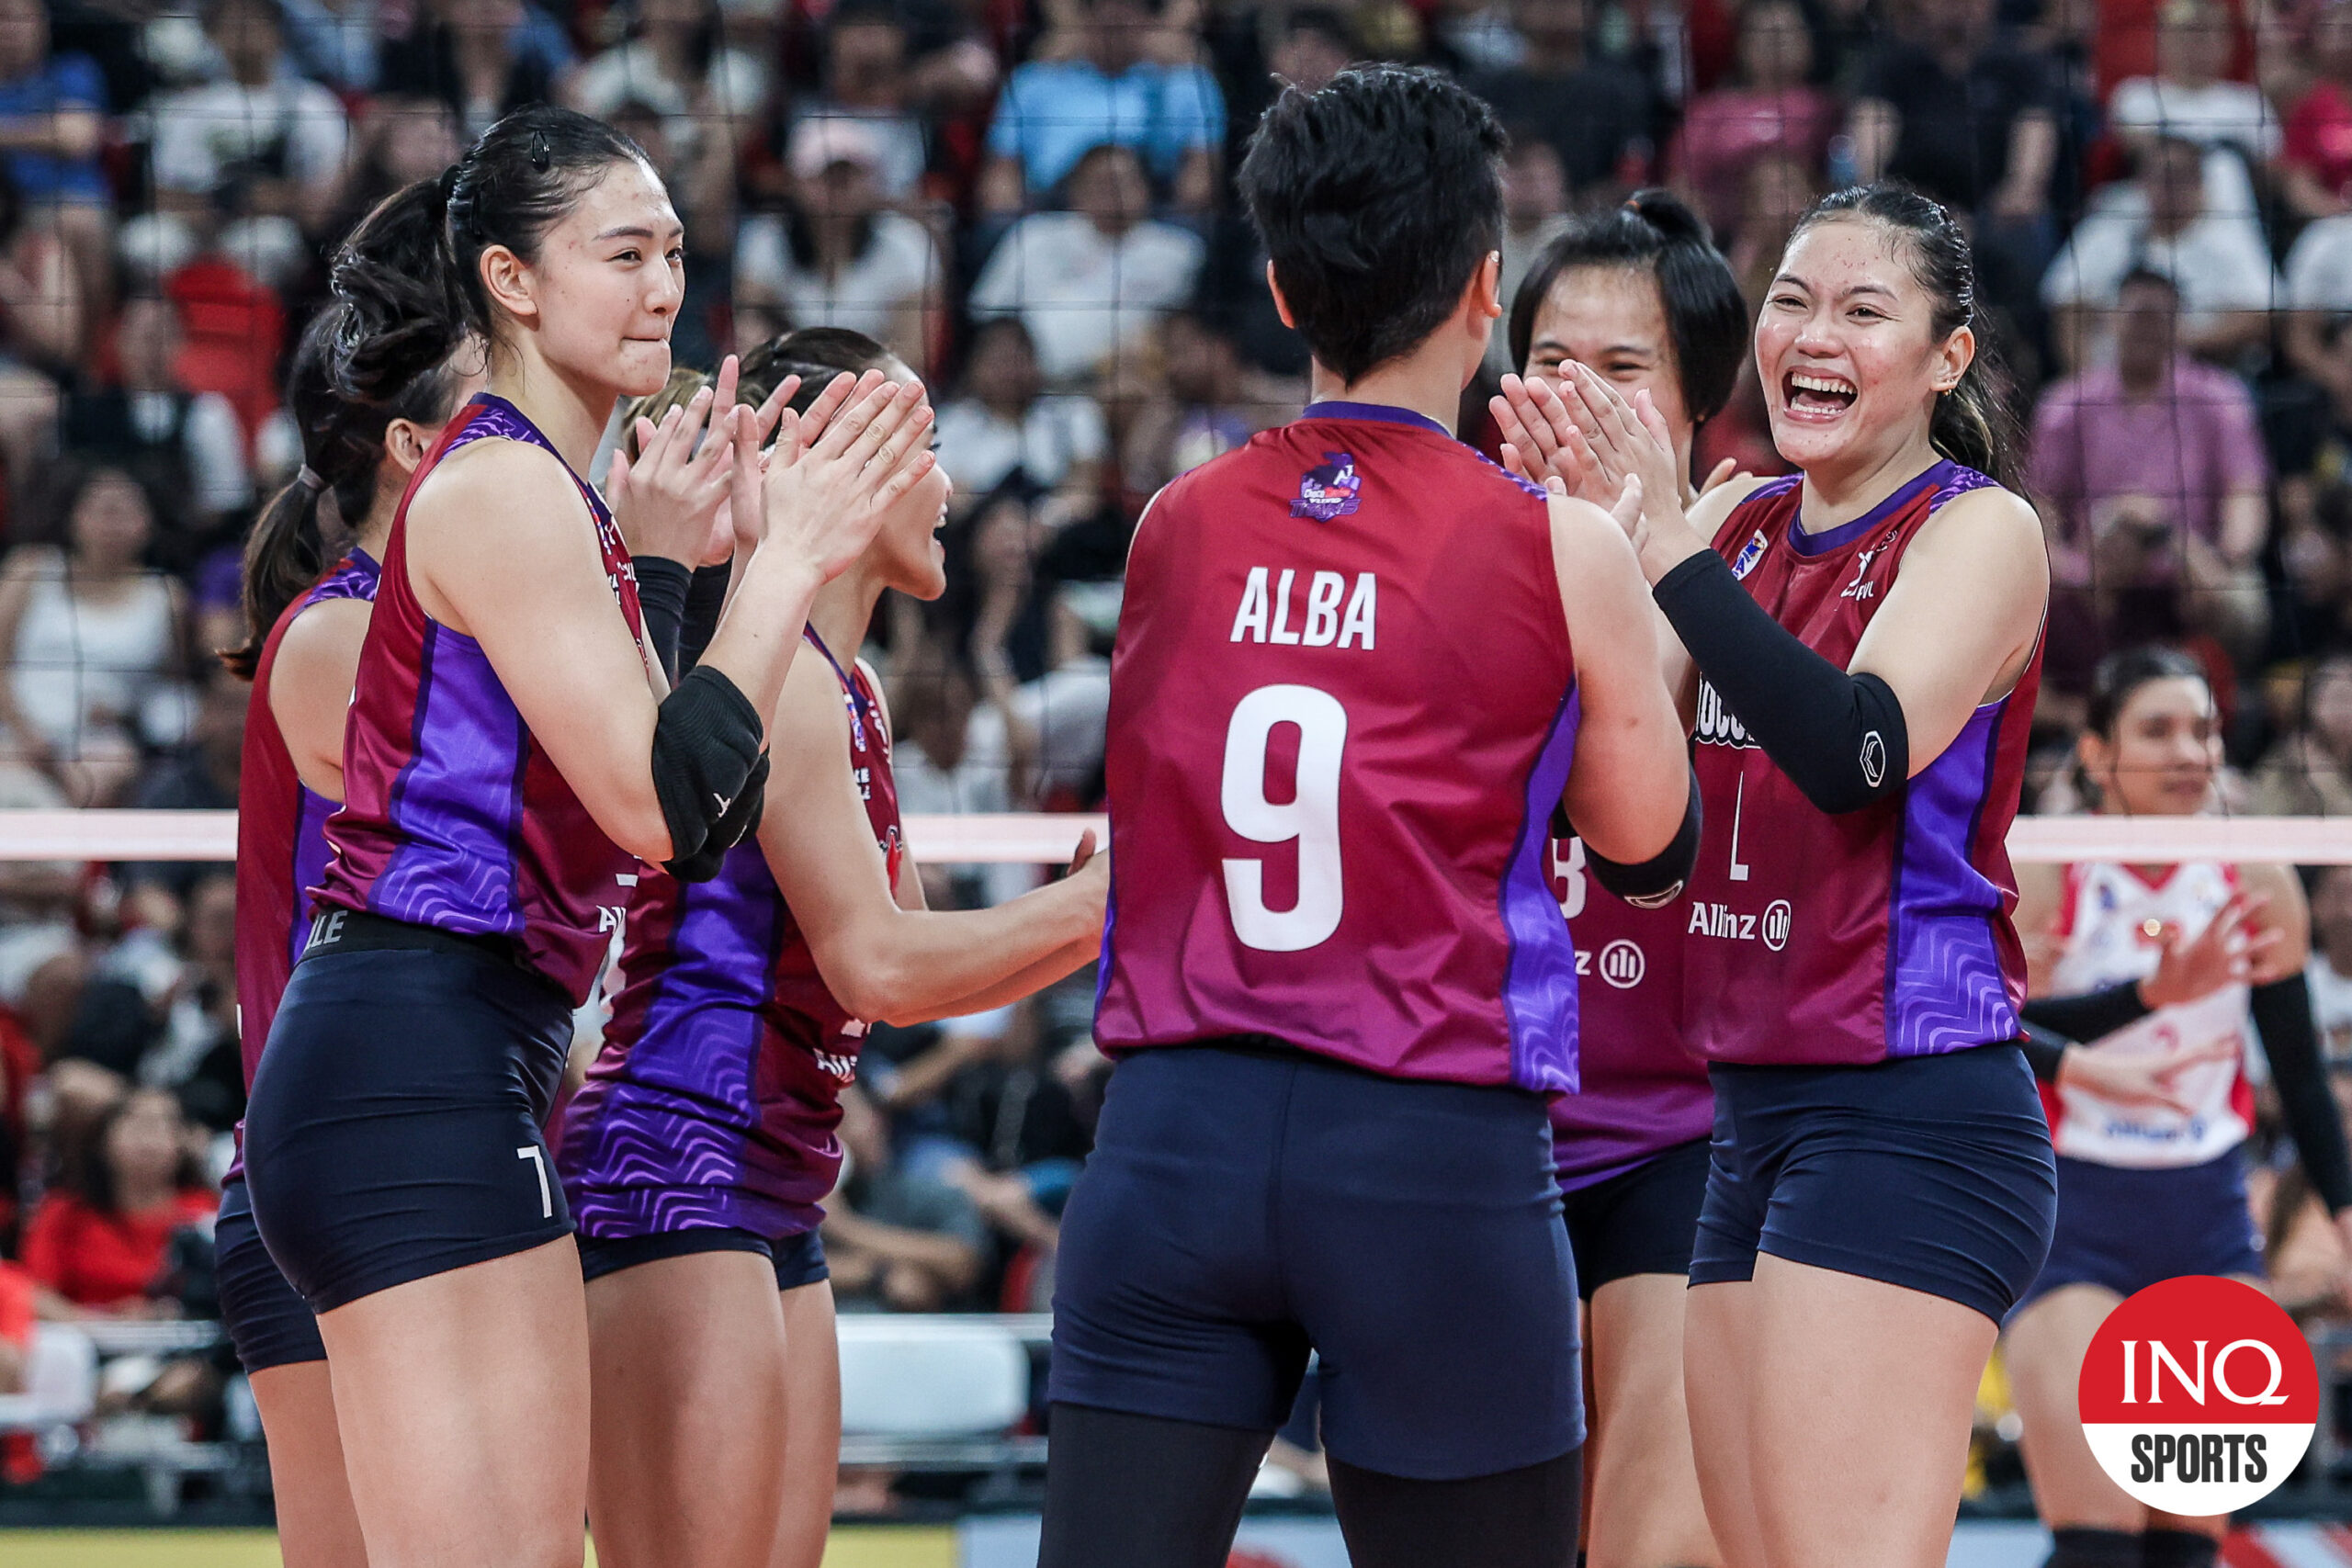 pvl: frustrating losing skid to creamline finally ends for choco mucho